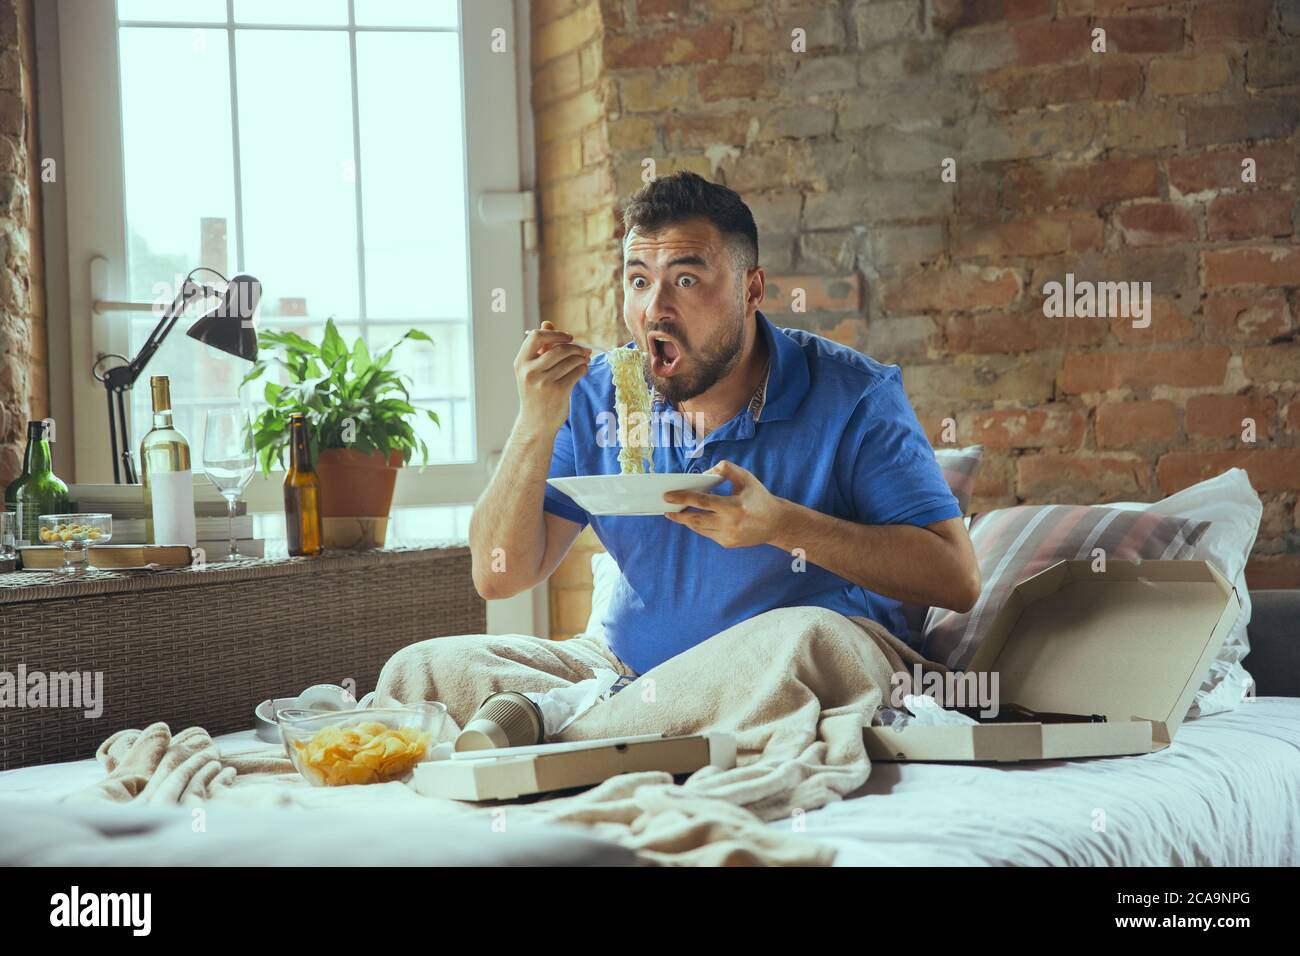 Shocked eating instant noodle. Lazy man living in his bed surrounded with messy. No need to go out to be happy. Using gadgets, watching movie and series, looks emotional. Eating snacks and fast food. Stock Photo